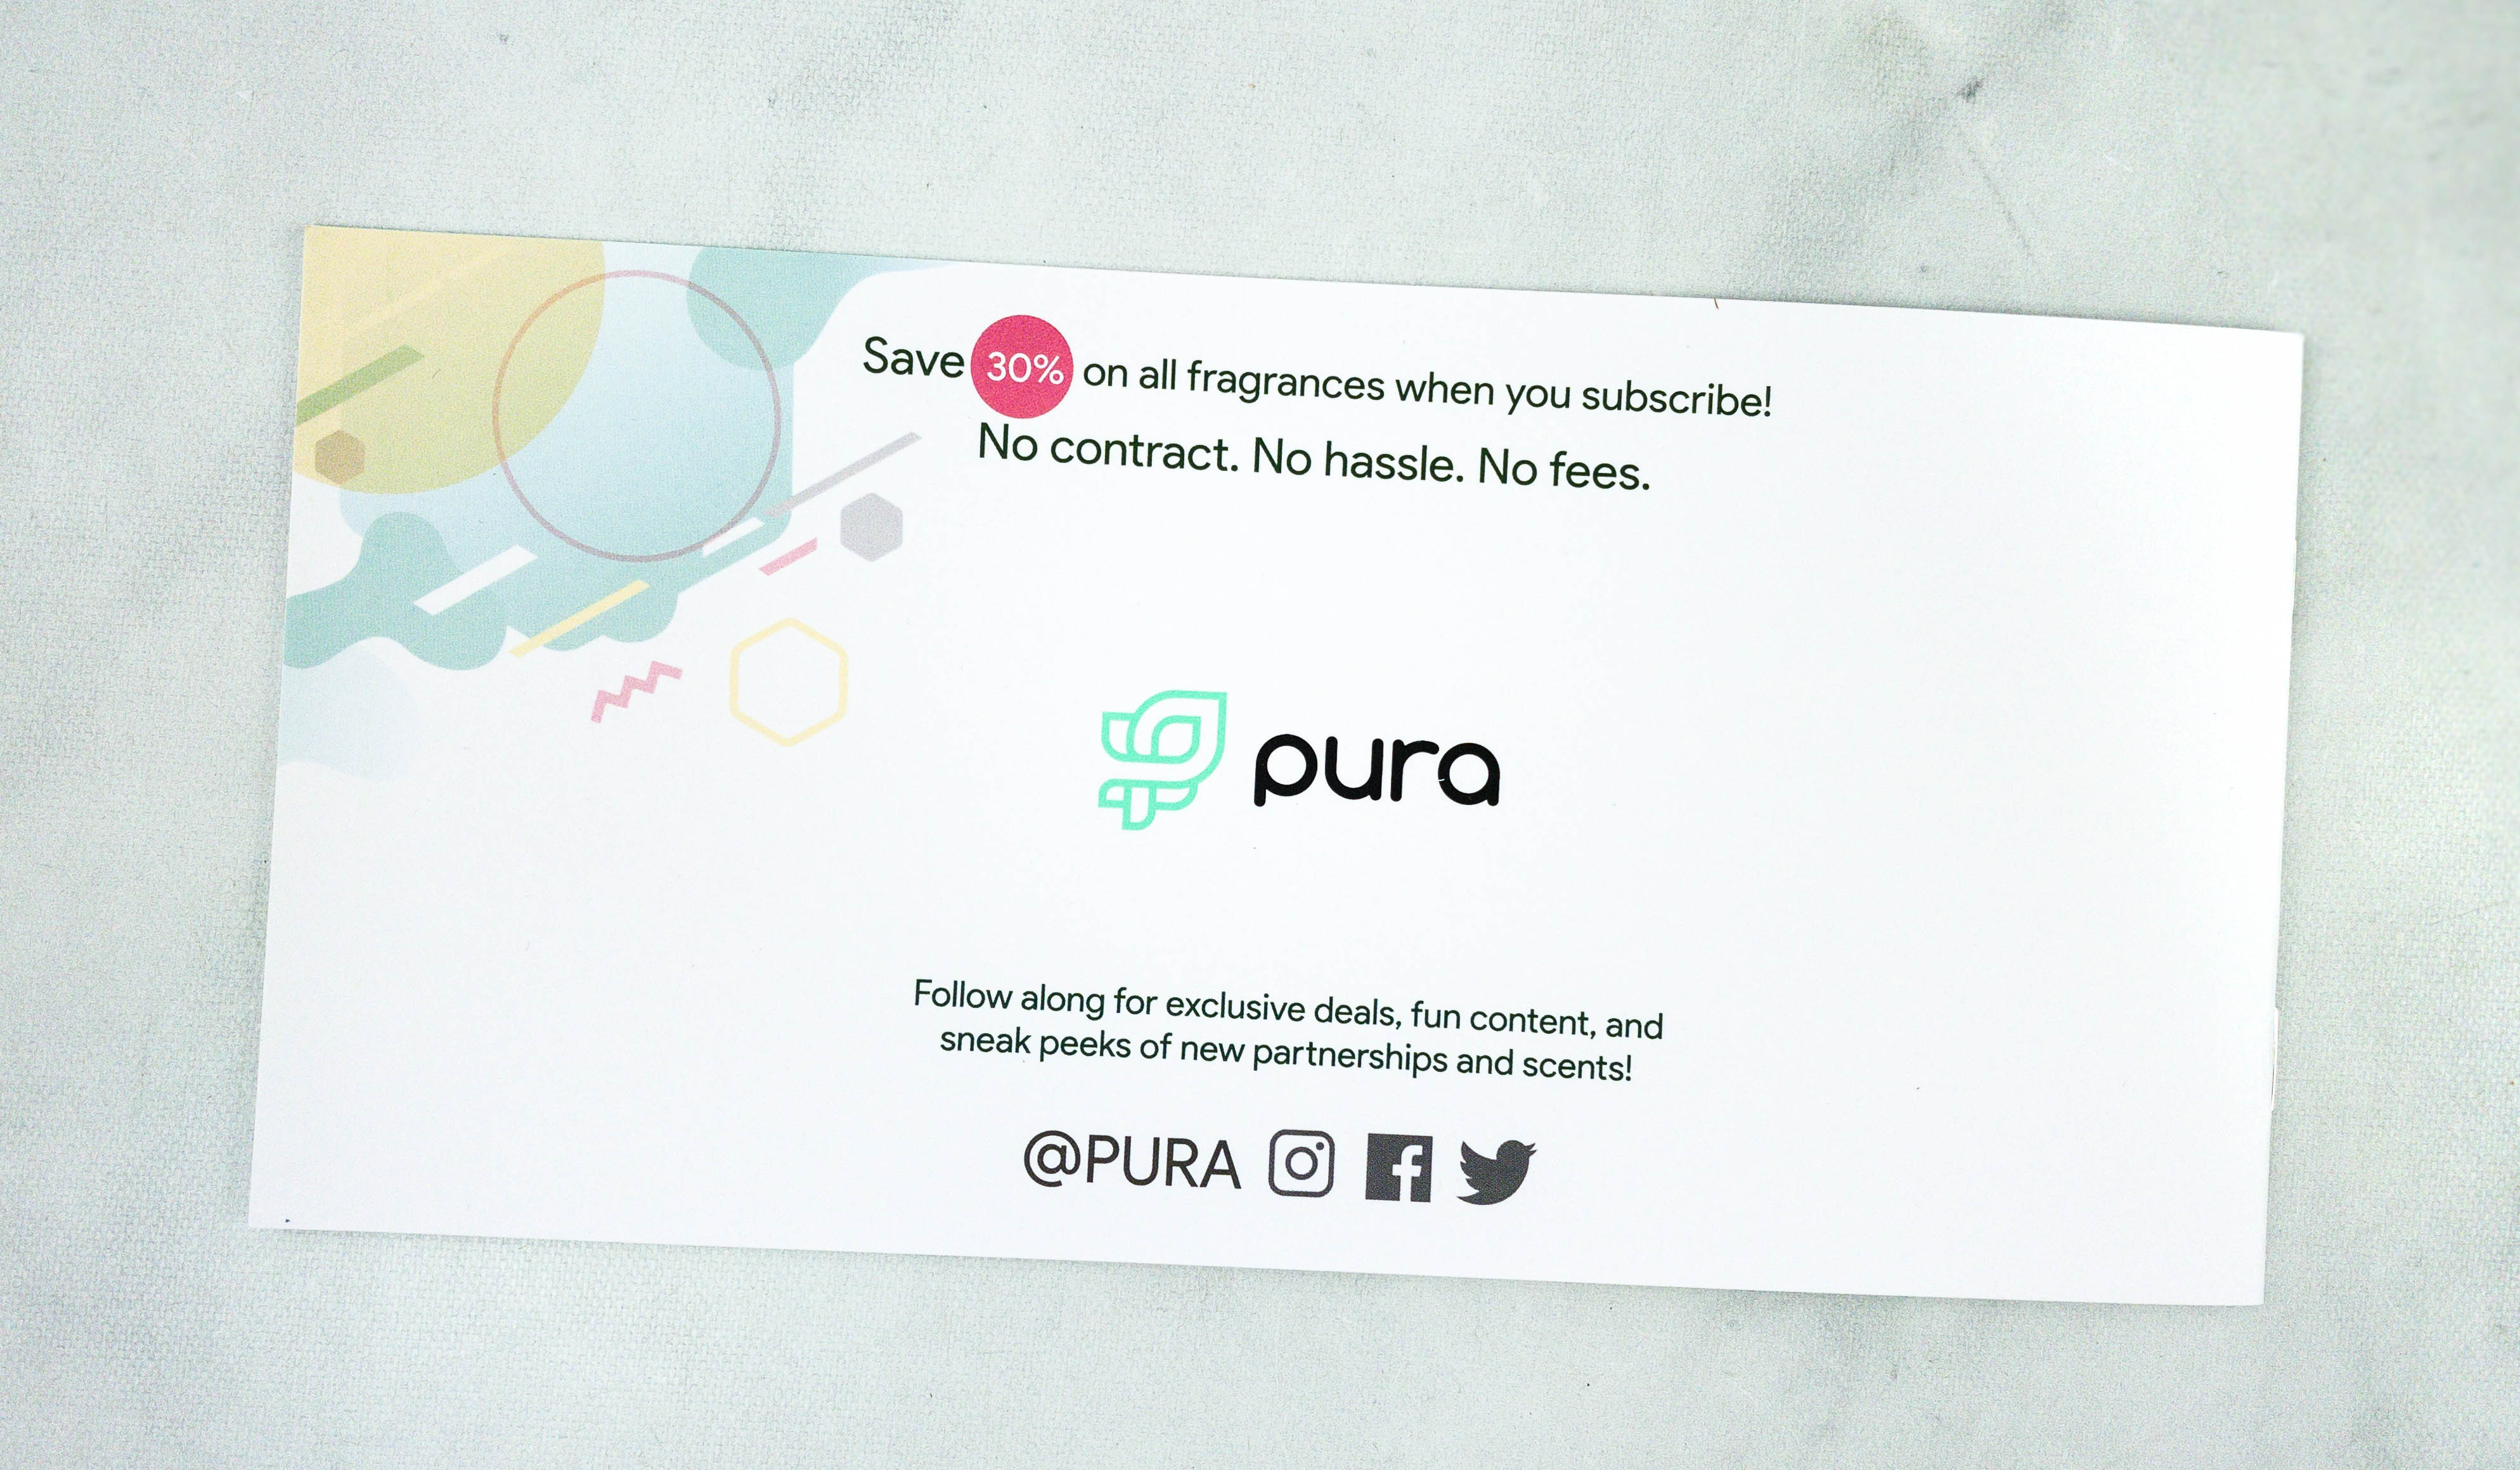 Pura Fragrance Diffuser Review + Coupon hello subscription